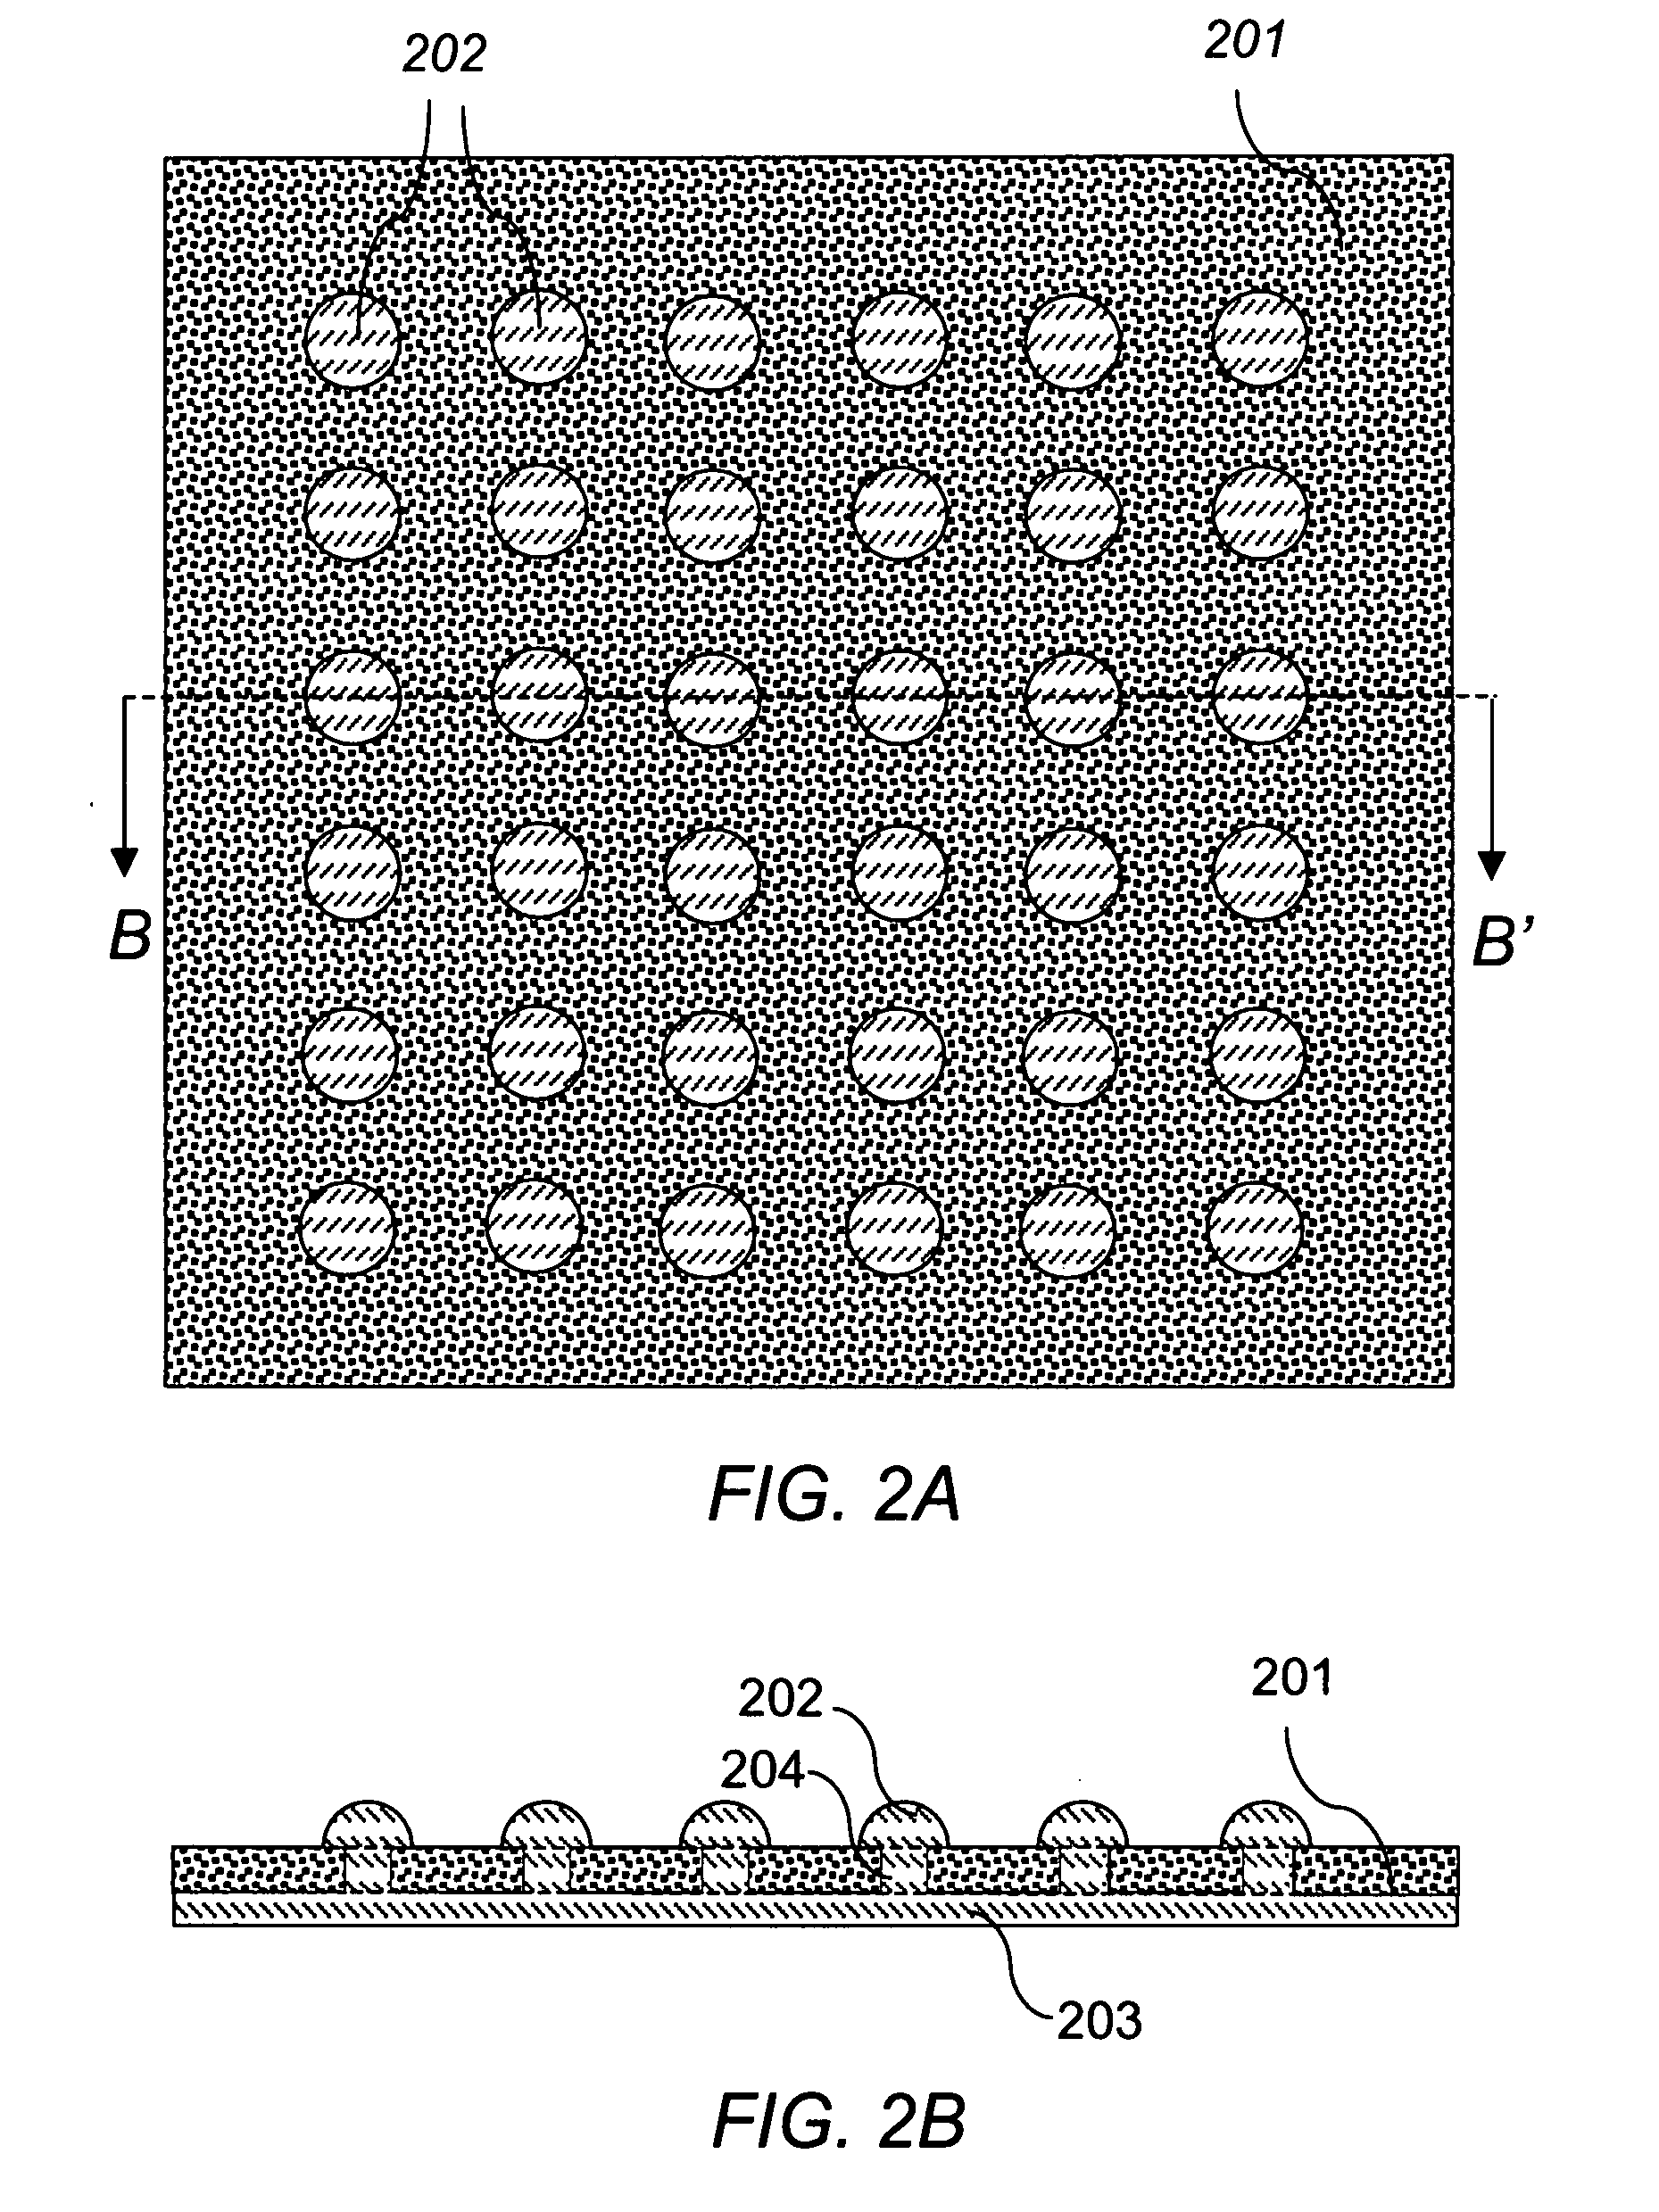 Interposer structures and methods of manufacturing the same